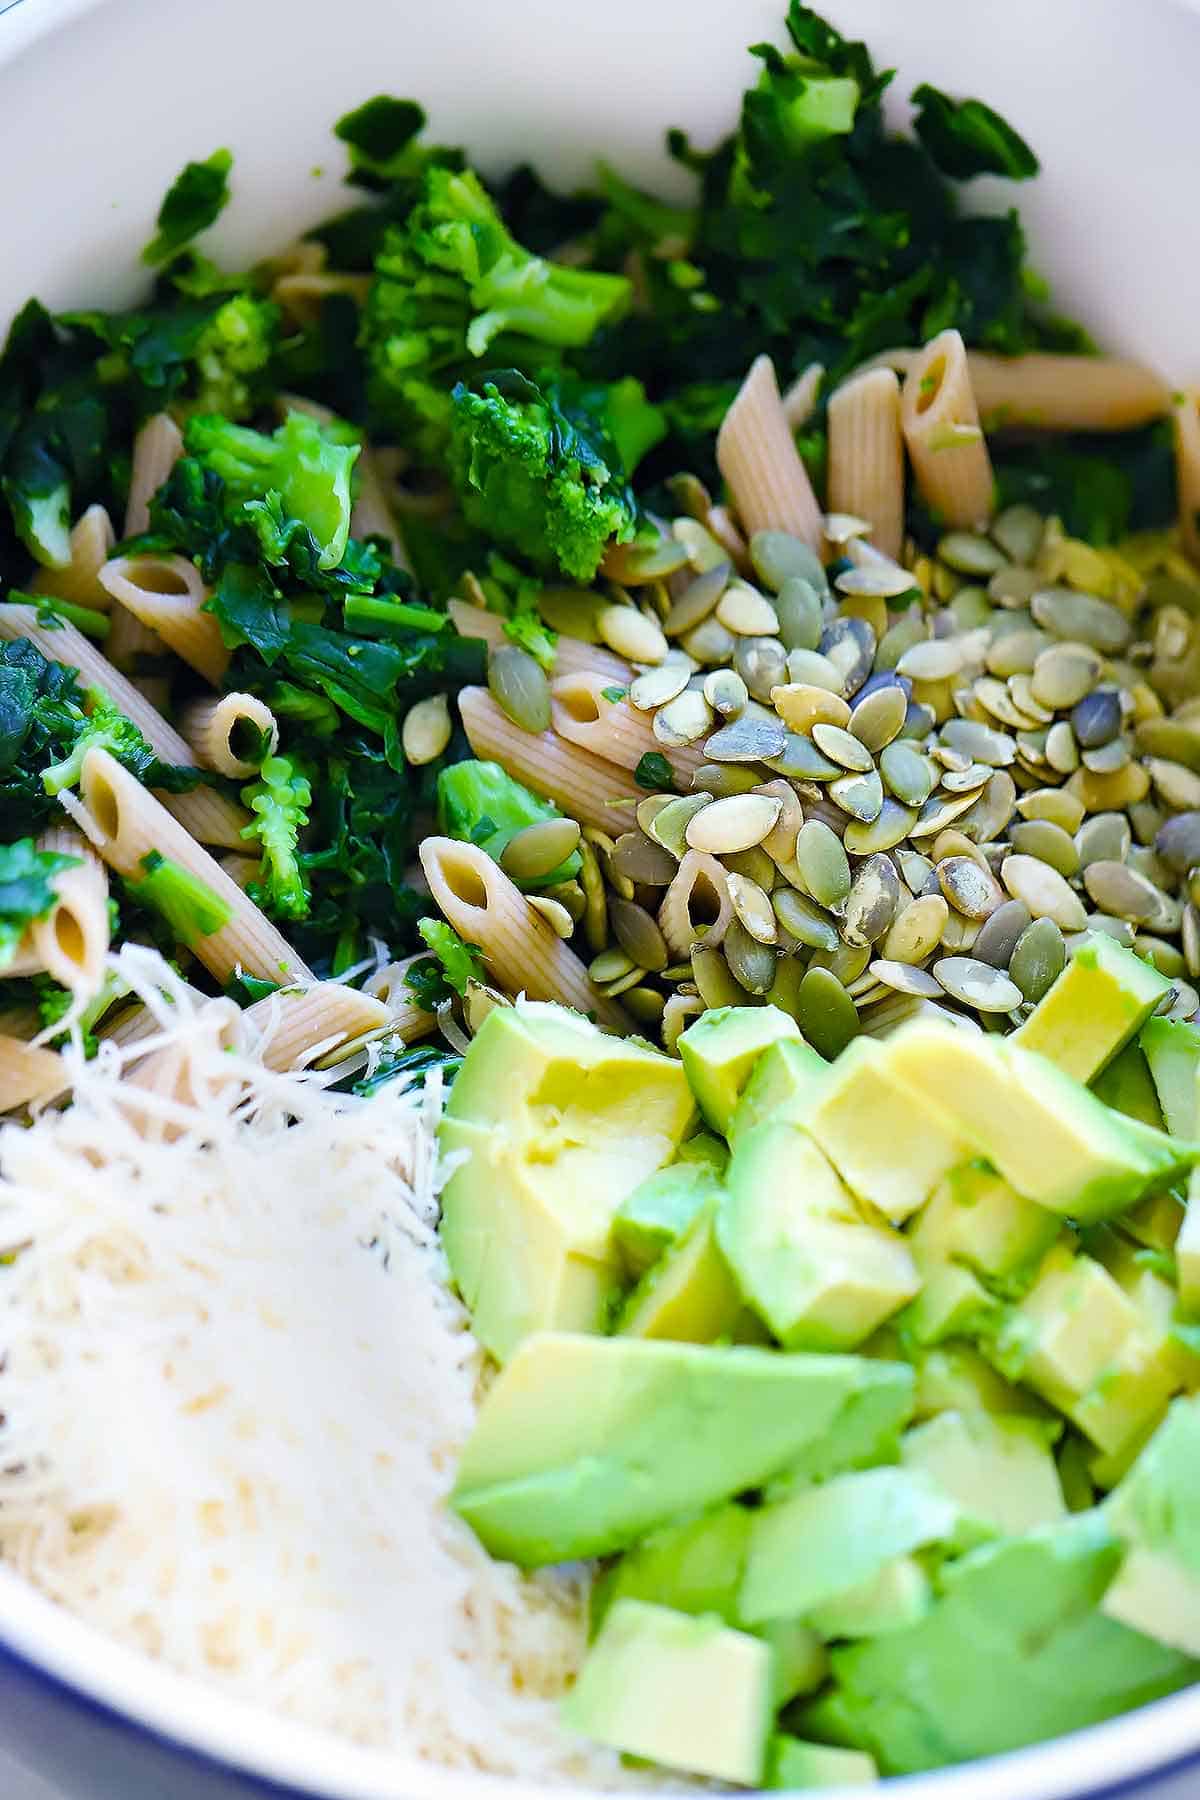 Mixing up whole wheat pasta, broccoli, spinach, avocado, pumpkin seeds, and parmesan cheese in a large bowl.